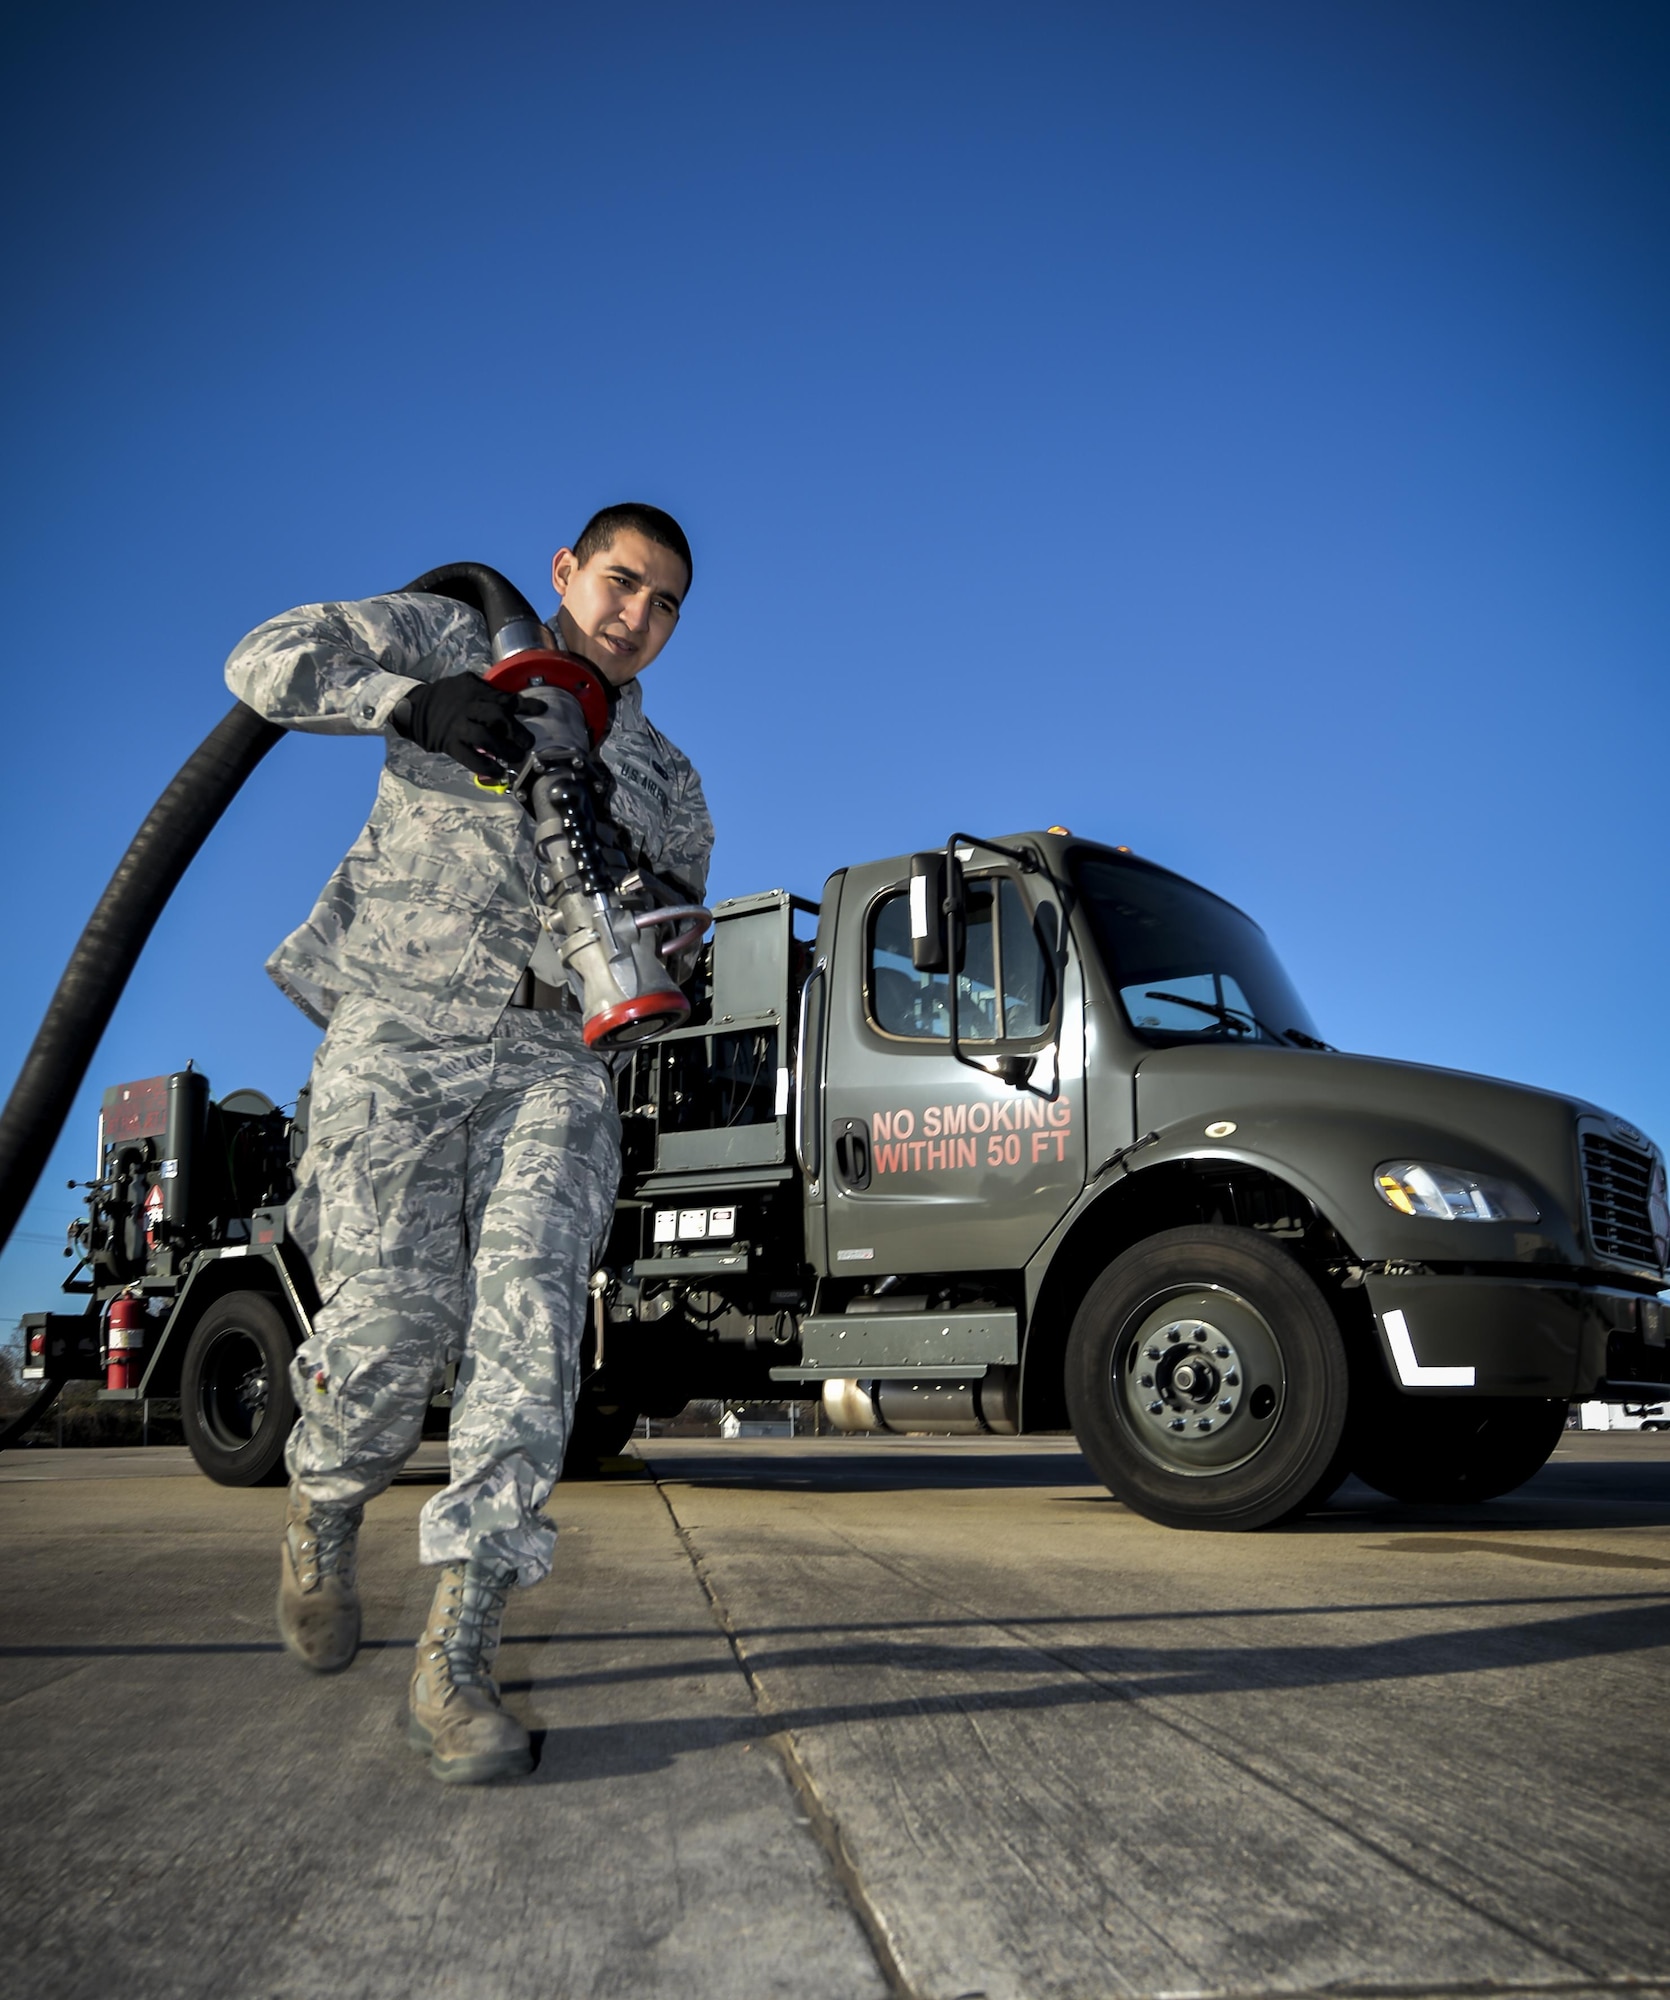 Airman 1st Class Ivan Saldivar, 2nd Logistics Readiness Squadron fuel distribution operator, carries a fuel hose from an R-12 hydrant servicing truck at Barksdale Air Force Base, La., Jan. 11, 2016. This truck fuels aircraft faster than conventional trucks by pumping fuel directly from the underground piping system. (U.S. Air Force photo/Airman 1st Class Mozer O. Da Cunha)